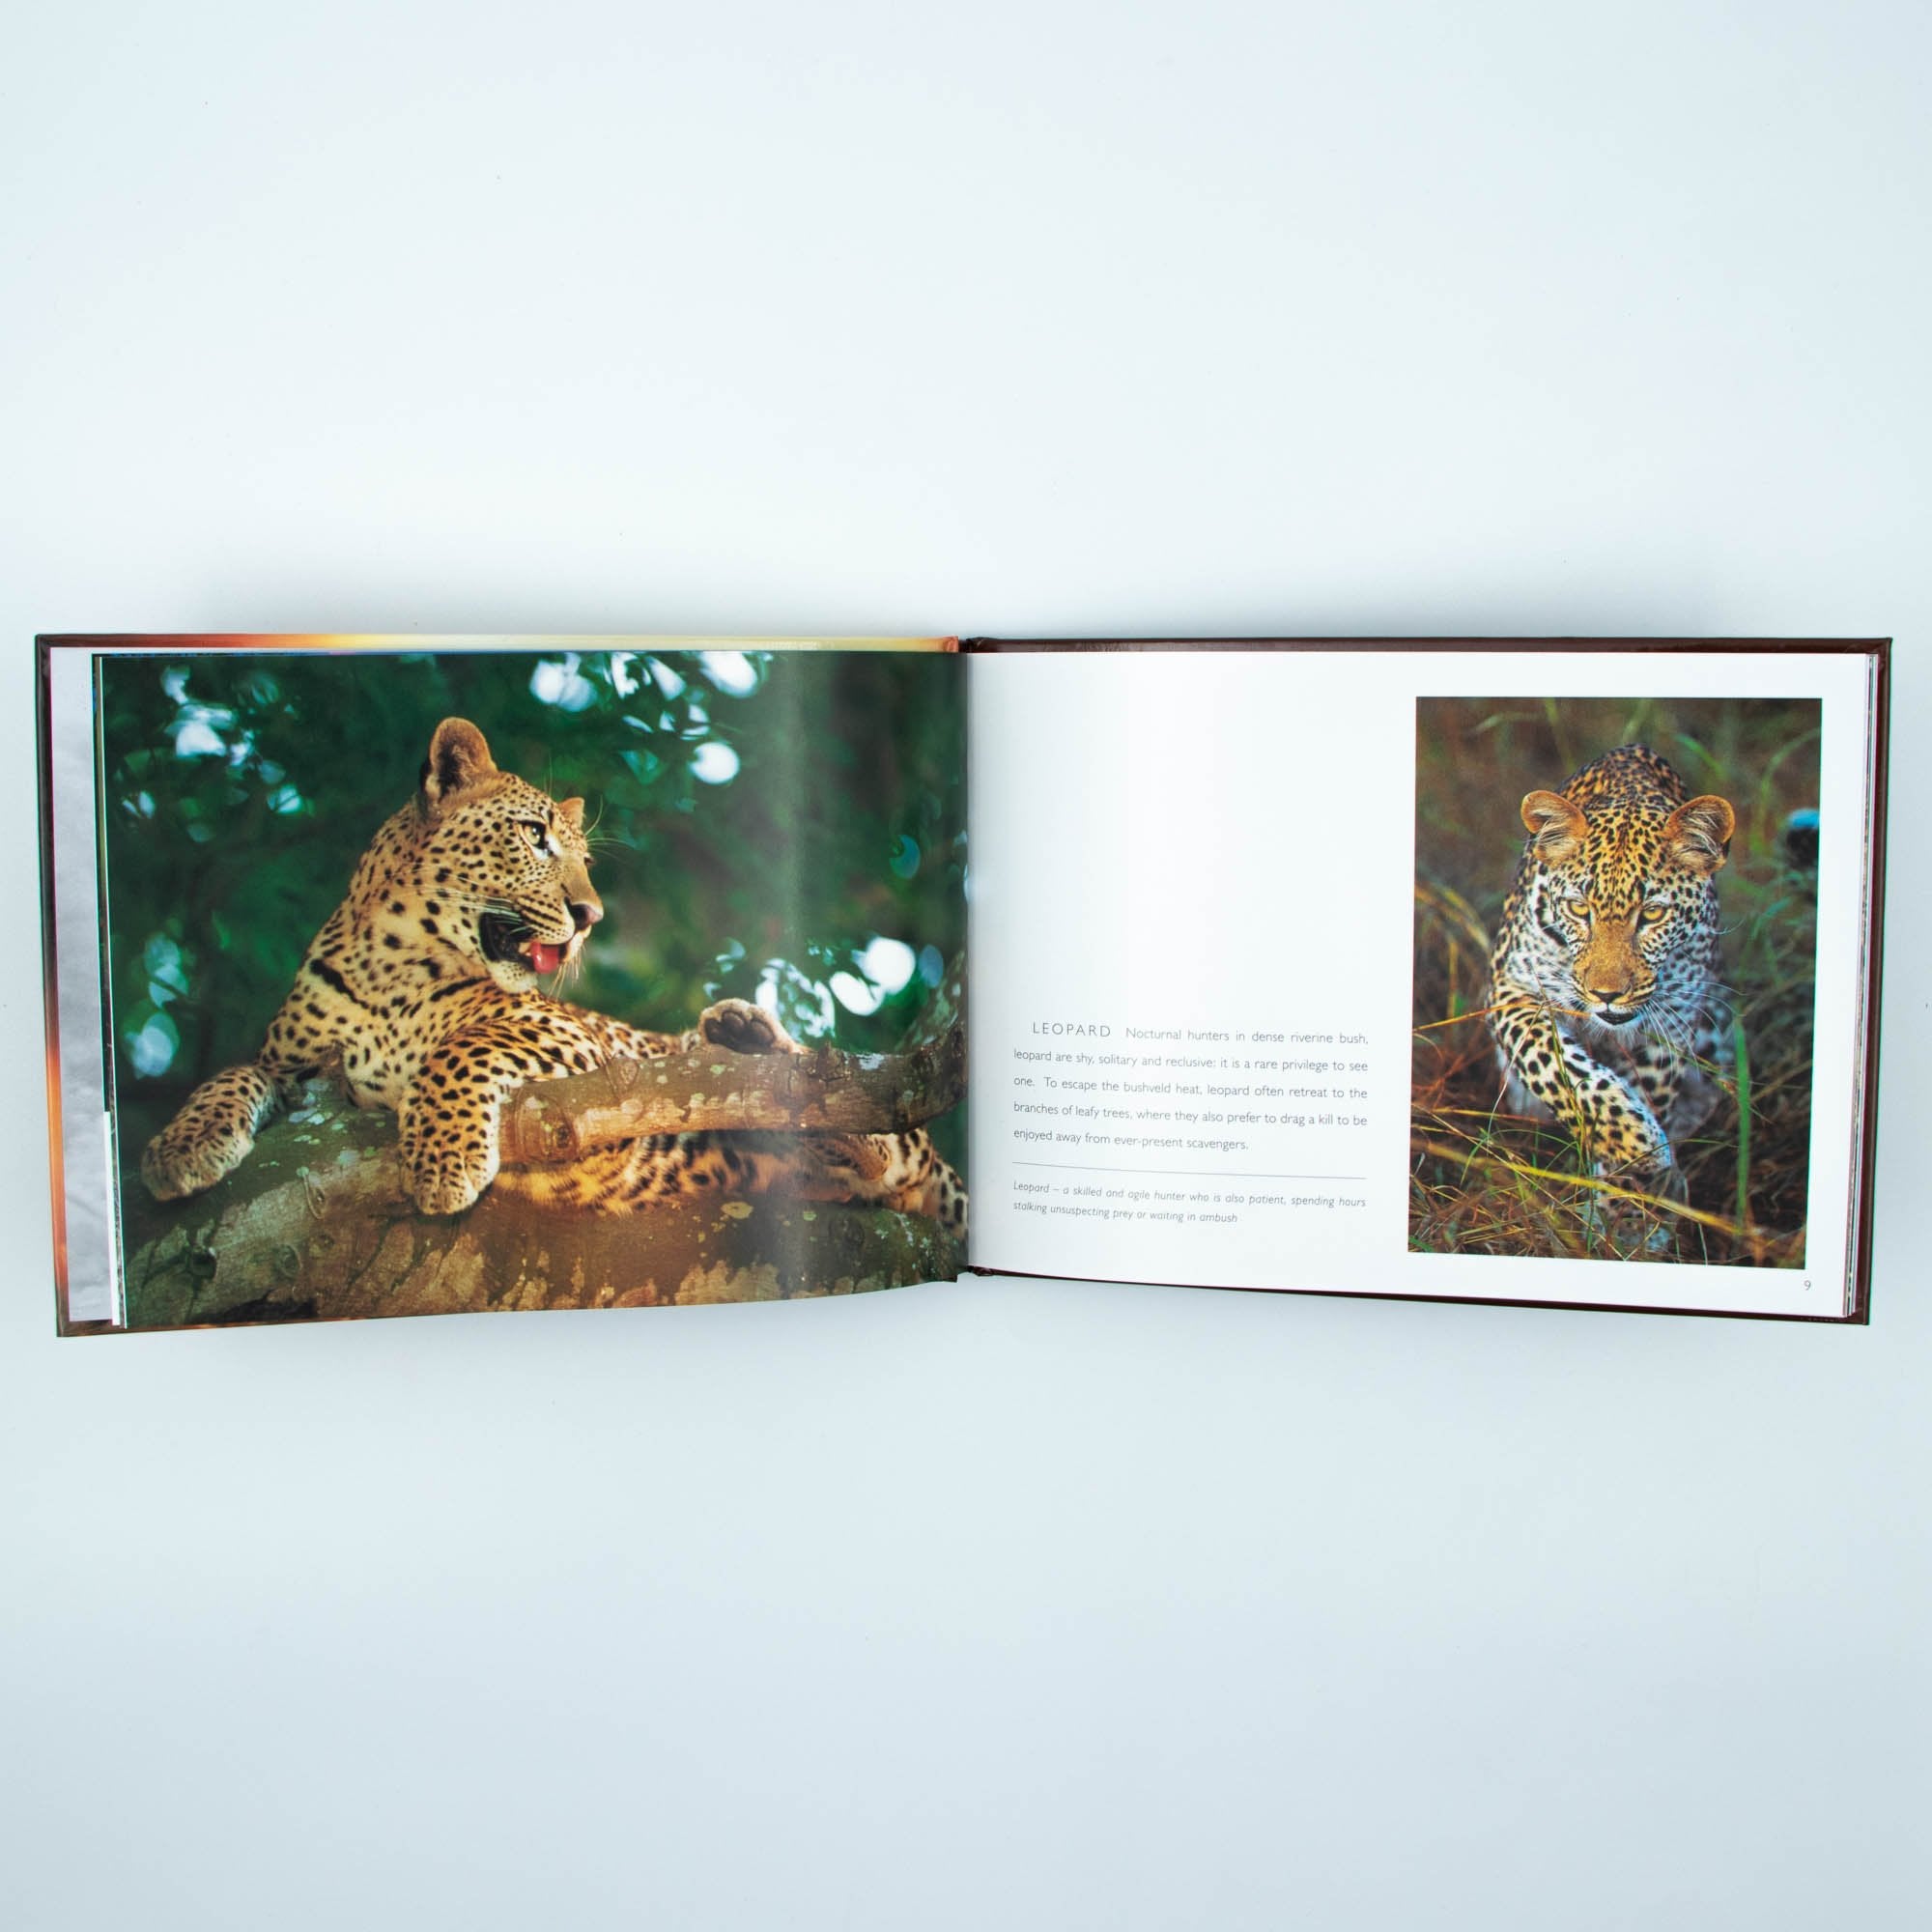 Kruger National Park Hard Cover Coffee Table Book